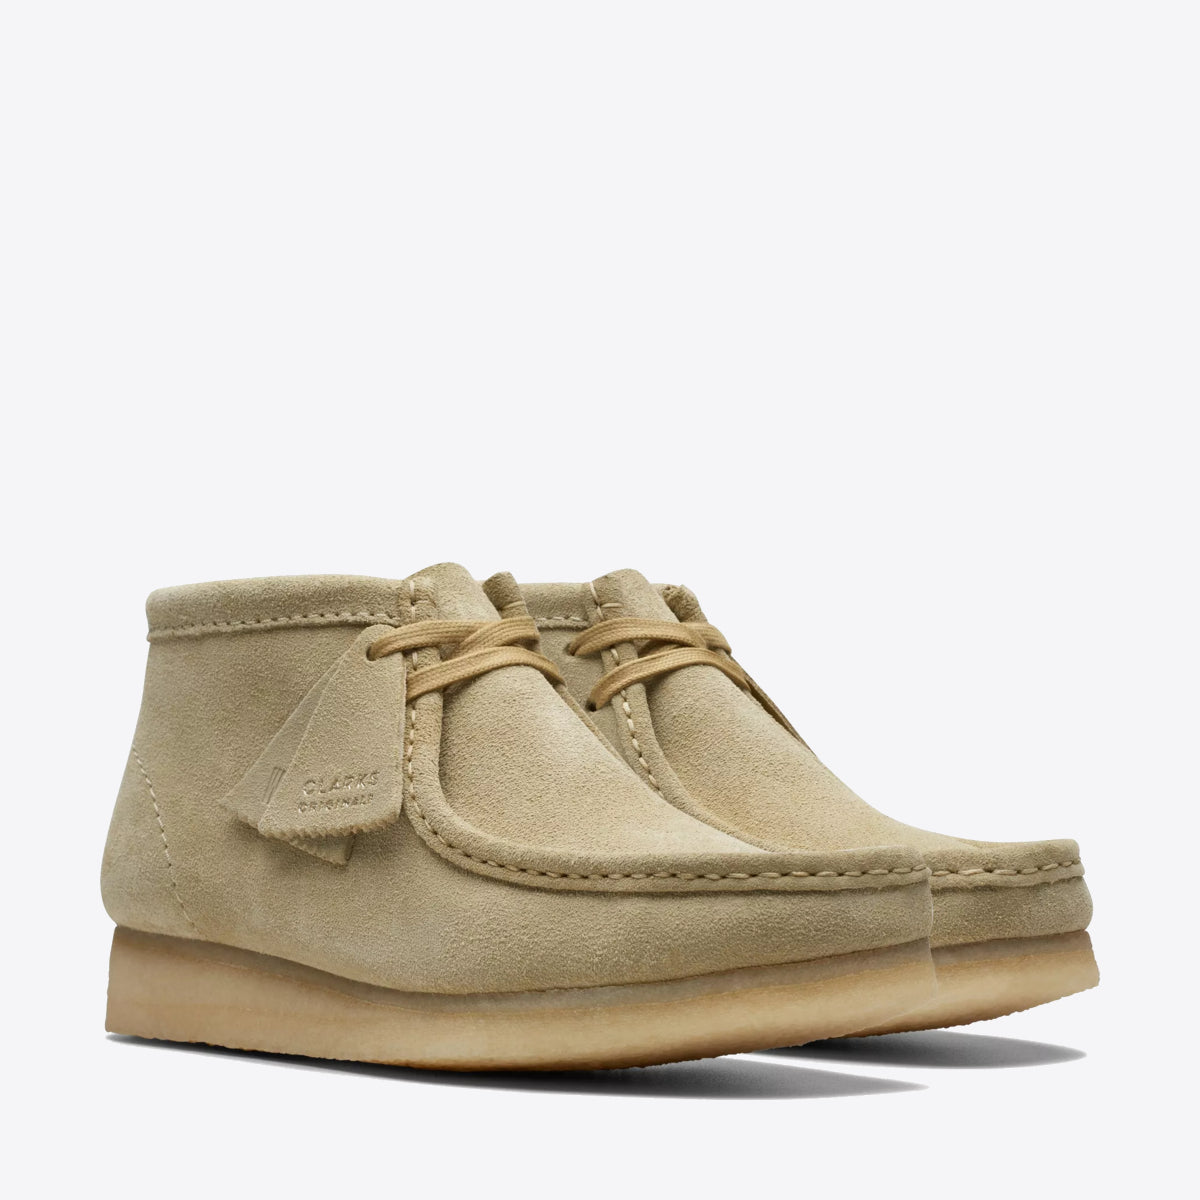 CLARKS Wallabee Boot Suede W Maple - Image 4